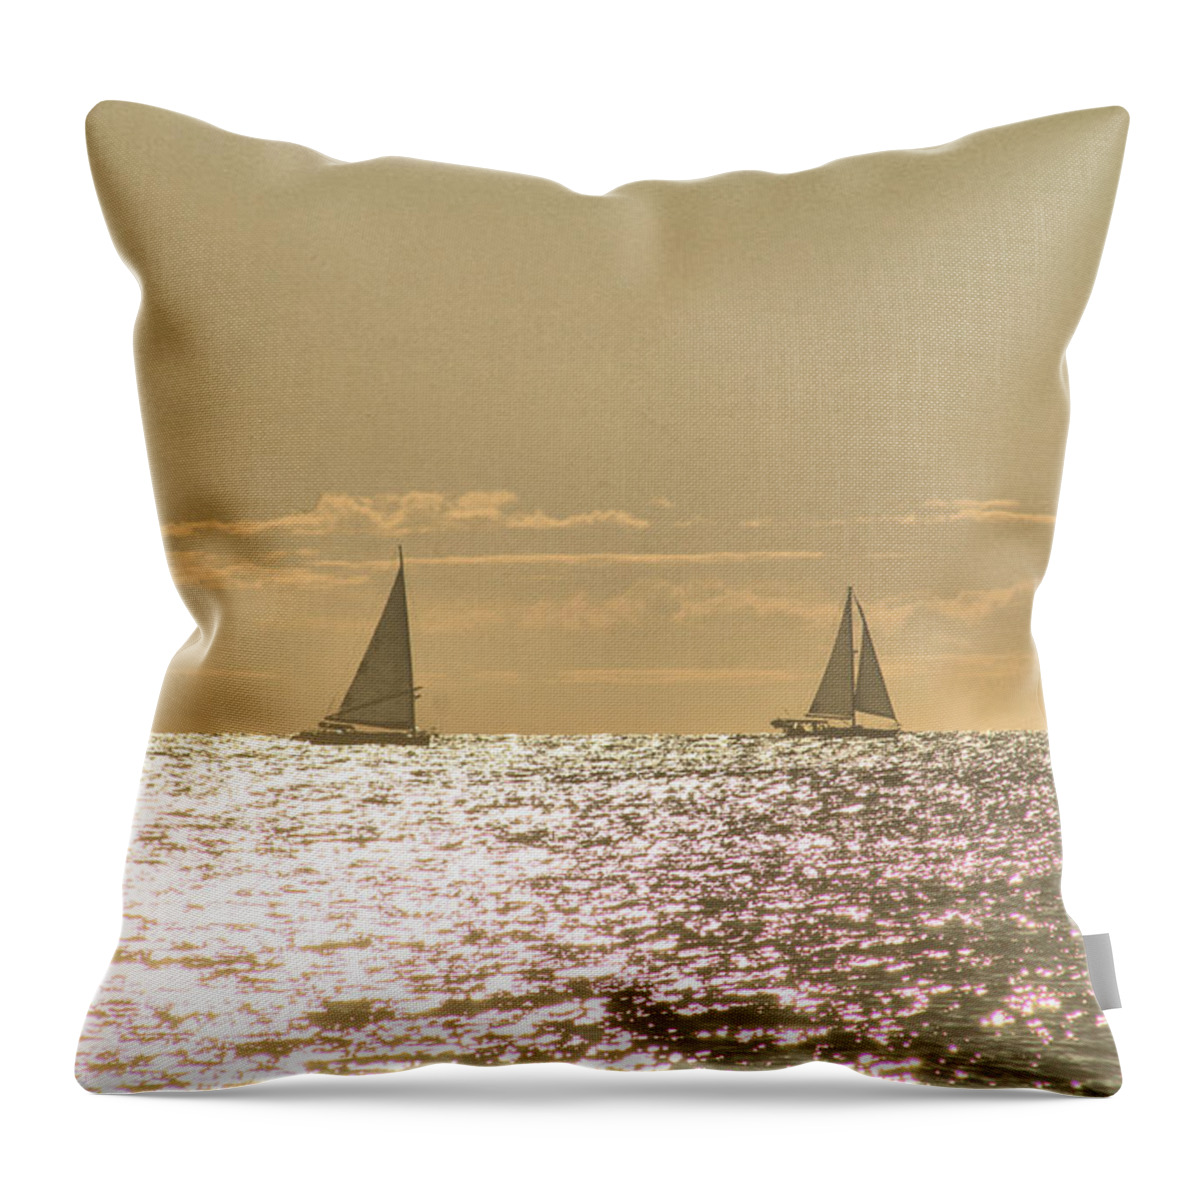 Water Throw Pillow featuring the photograph Sailing On The Horizon by Robert Banach